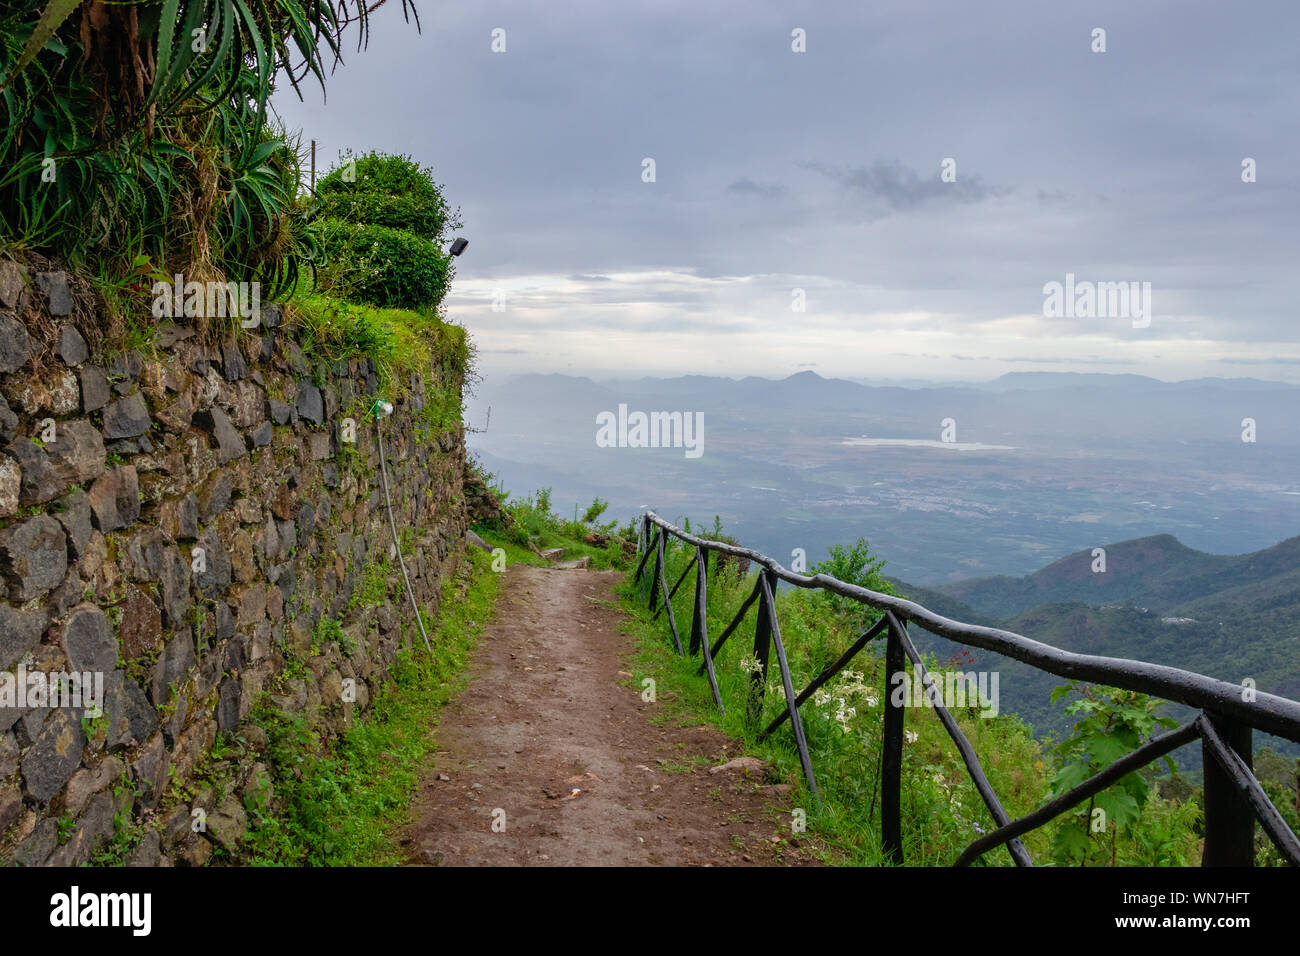 Nature View with leading path amazing landscape Image taken at Kodaikanal tamilnadu India from top of the hill. Image is showing the beautiful nature. Stock Photo